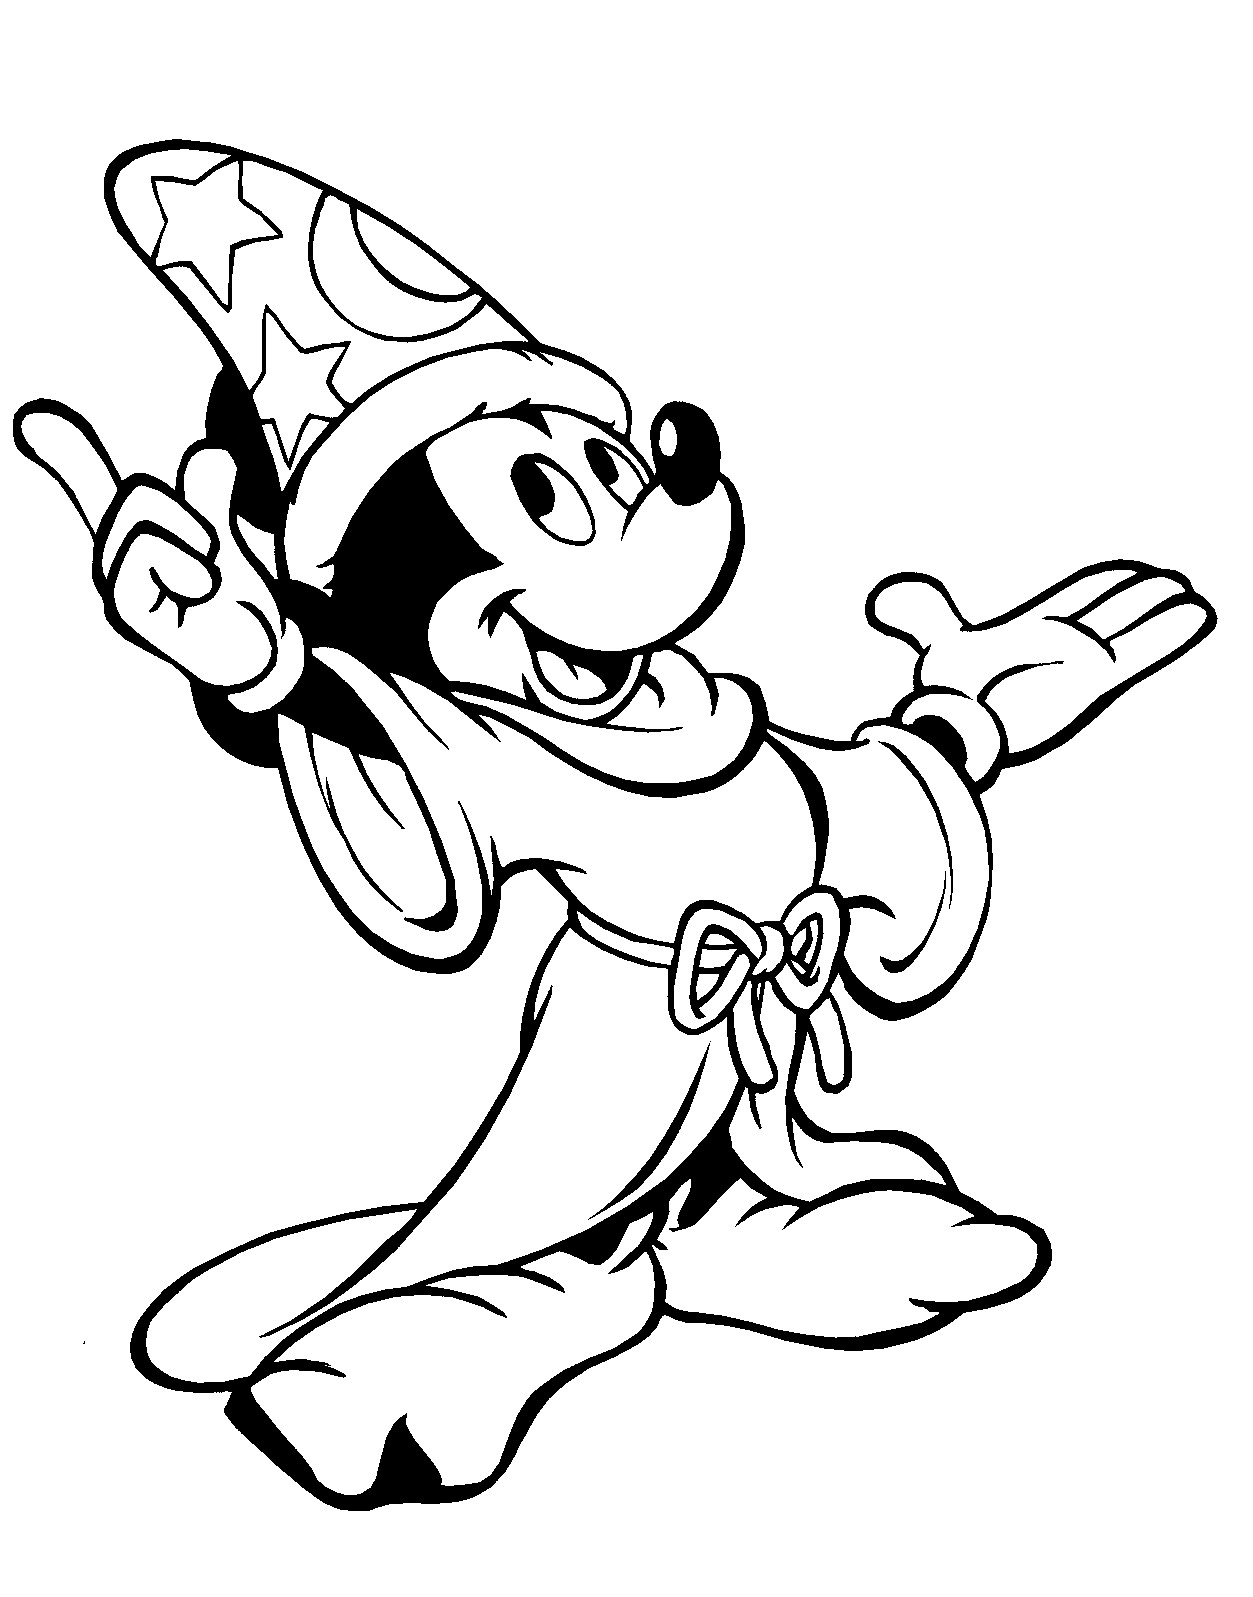 Mickey Printable Coloring Pages
 Free Printable Mickey Mouse Coloring Pages For Kids